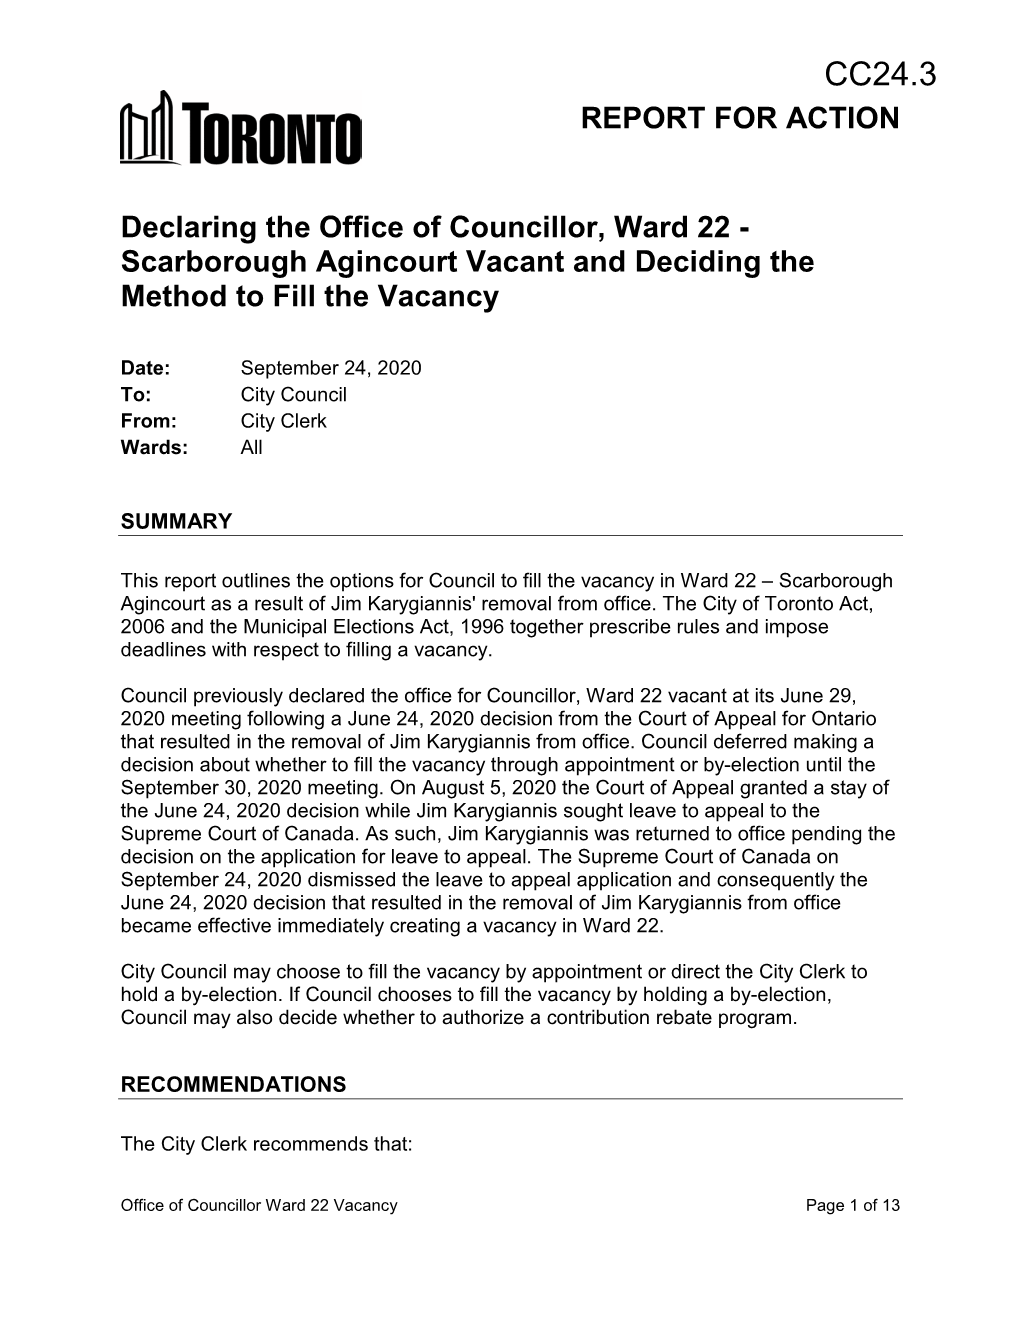 Declaring the Office of Councillor, Ward 22 - Scarborough Agincourt Vacant and Deciding the Method to Fill the Vacancy